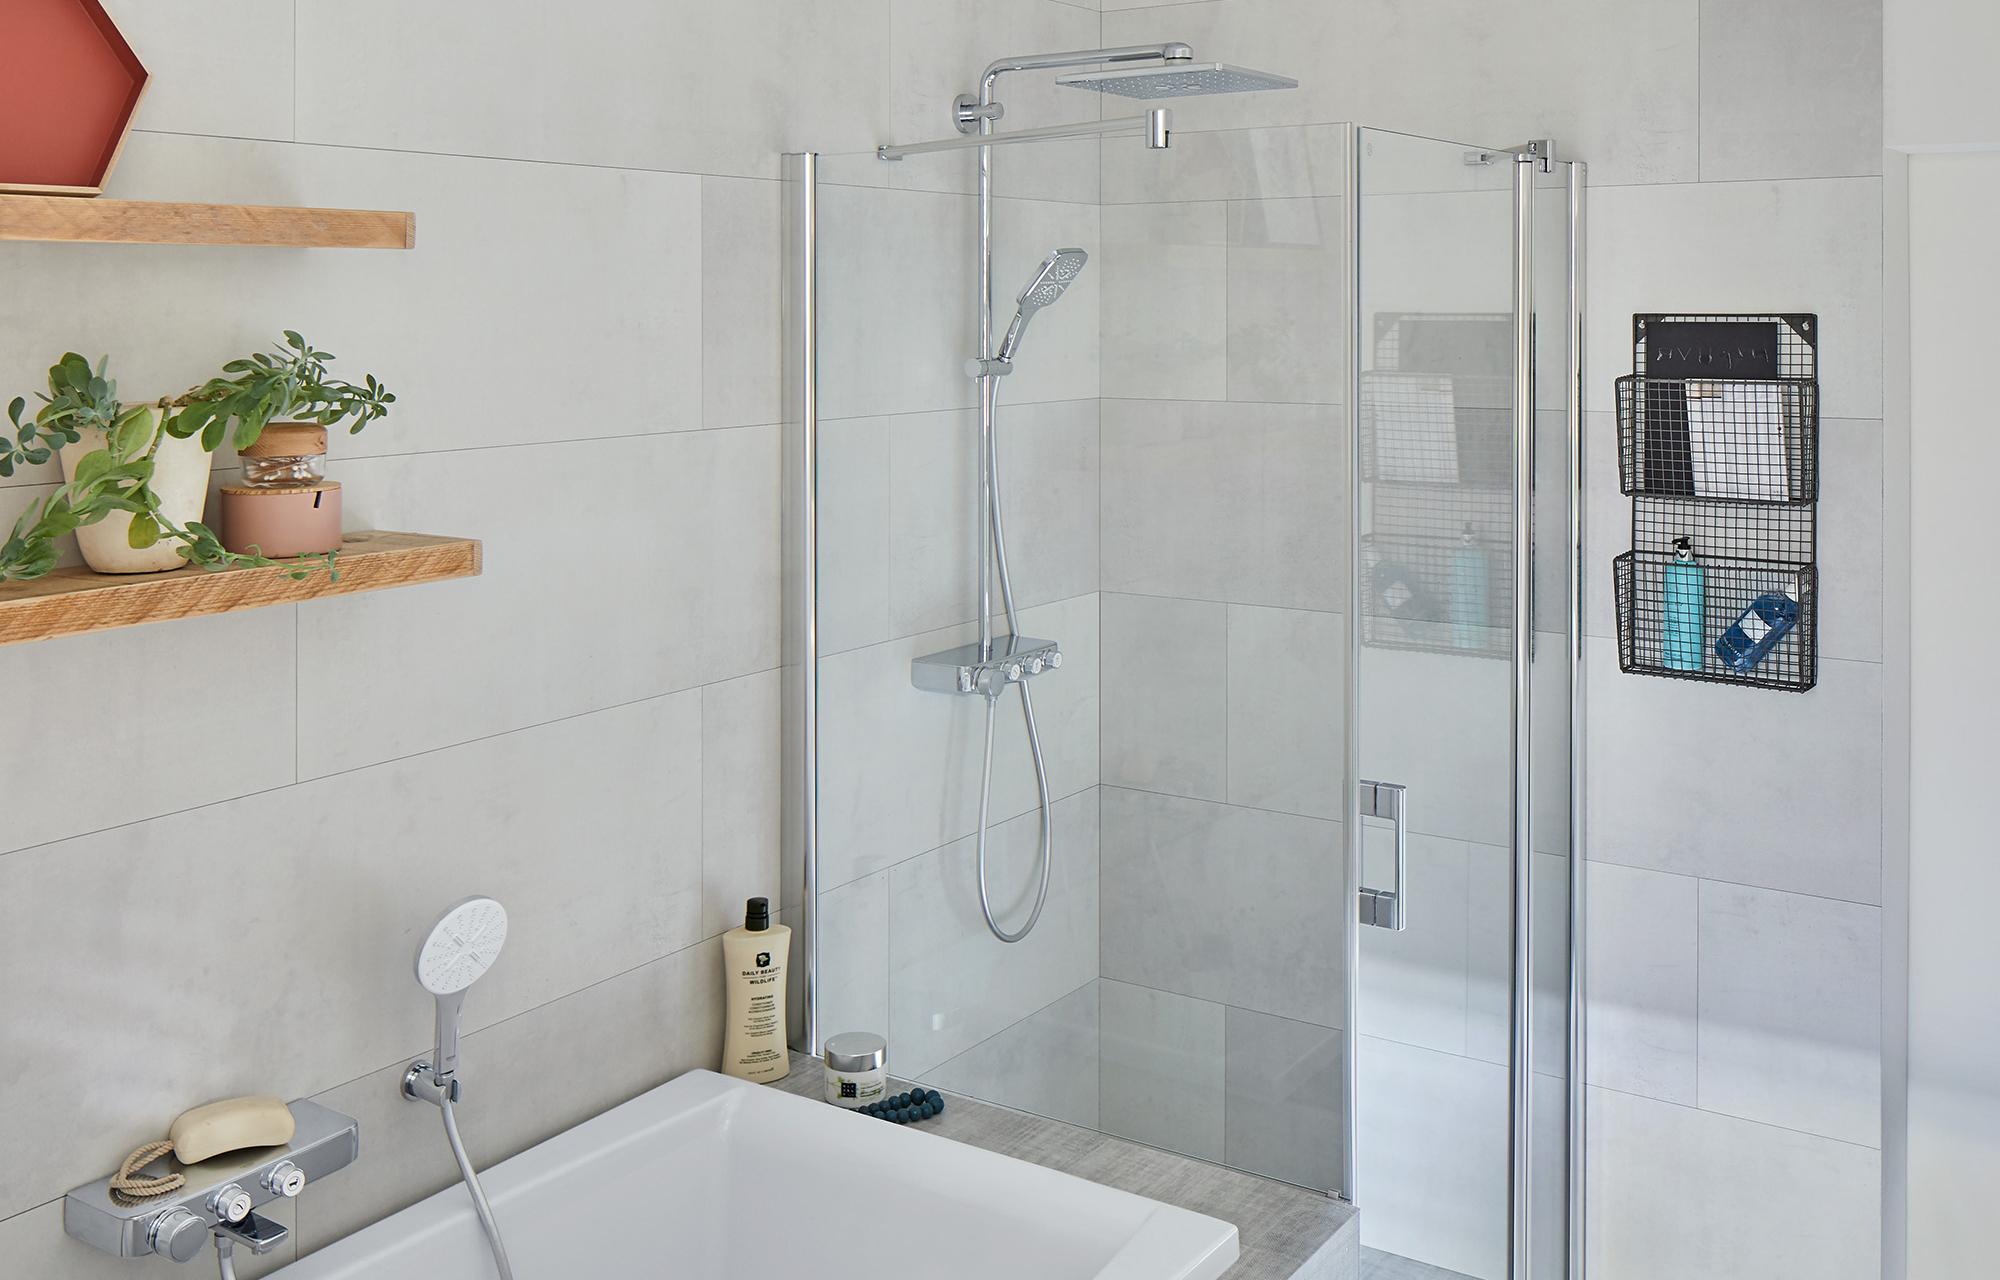 Kermi profile shower enclosure, PEGA single panel hinged door with fixed panel and shortened side wall next to bathtub